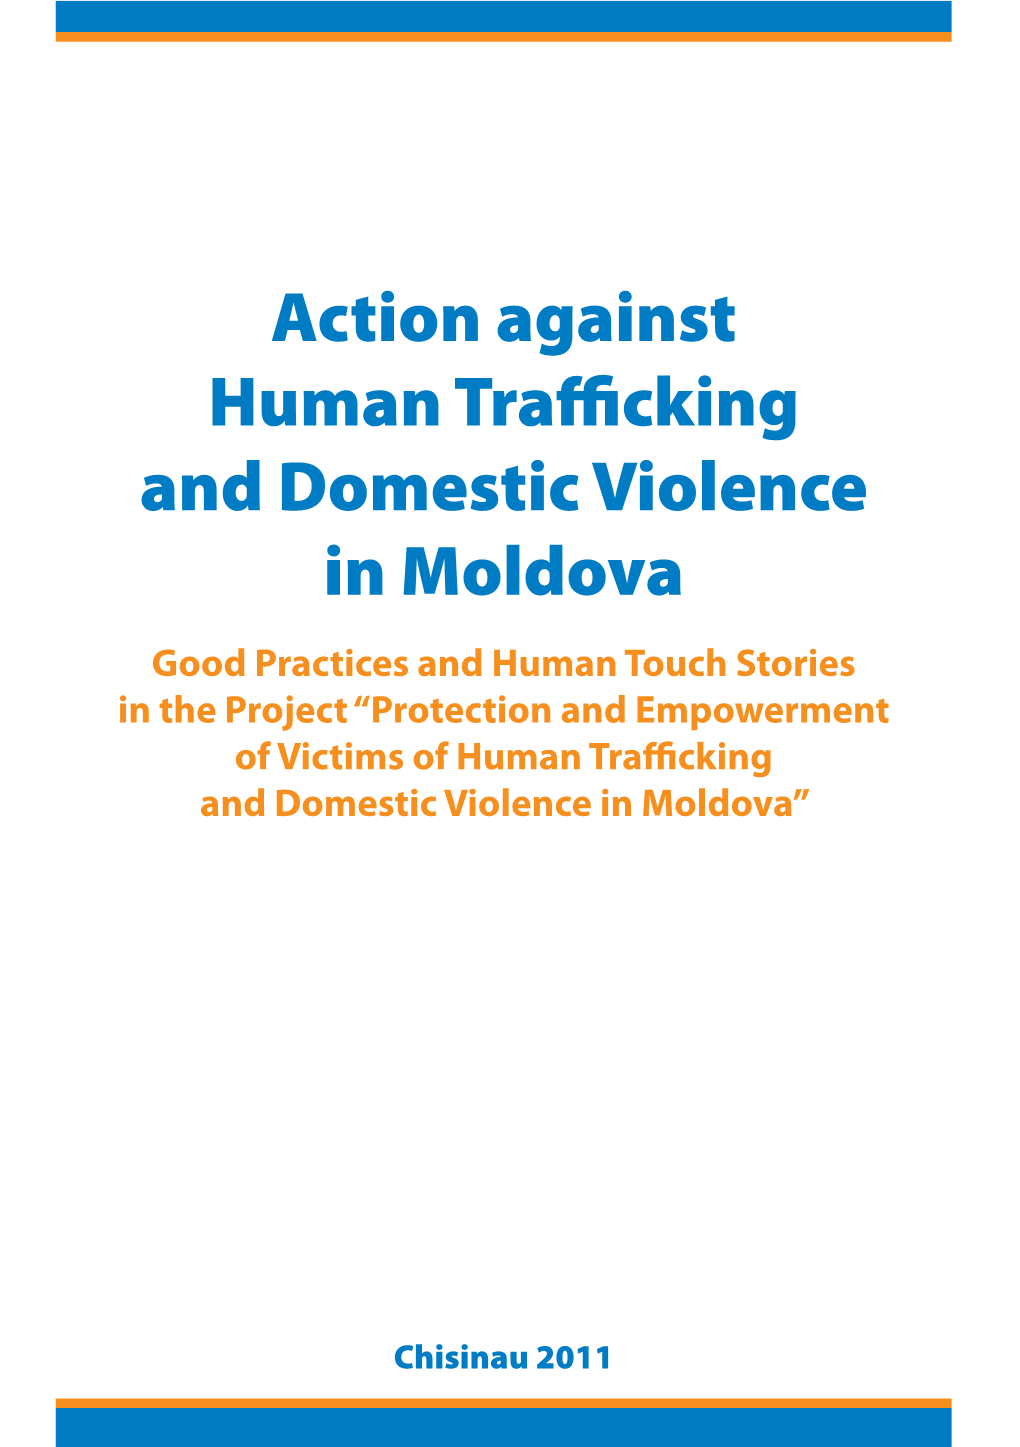 Action Against Human Trafficking and Domestic Violence in Moldova